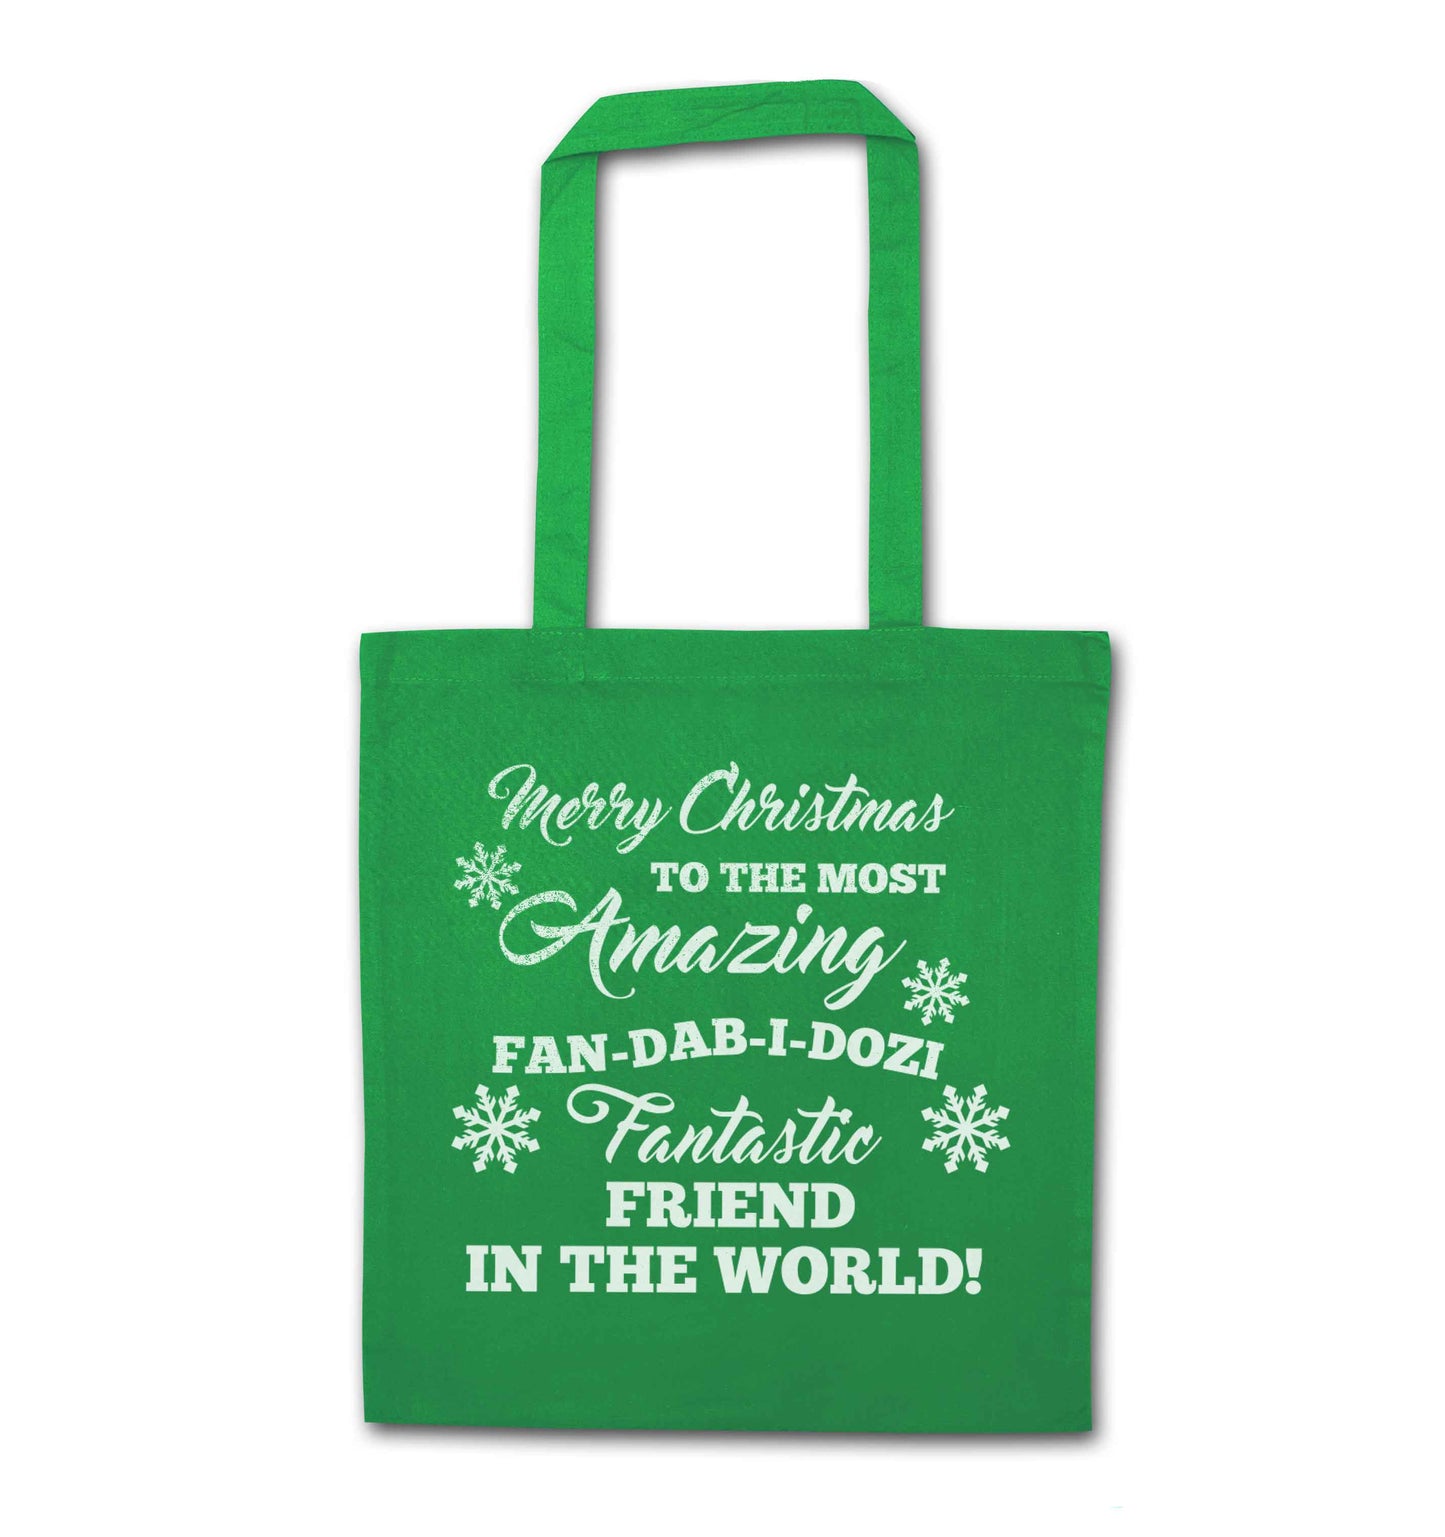 Merry Christmas to the most amazing fan-dab-i-dozi fantasic friend in the world green tote bag